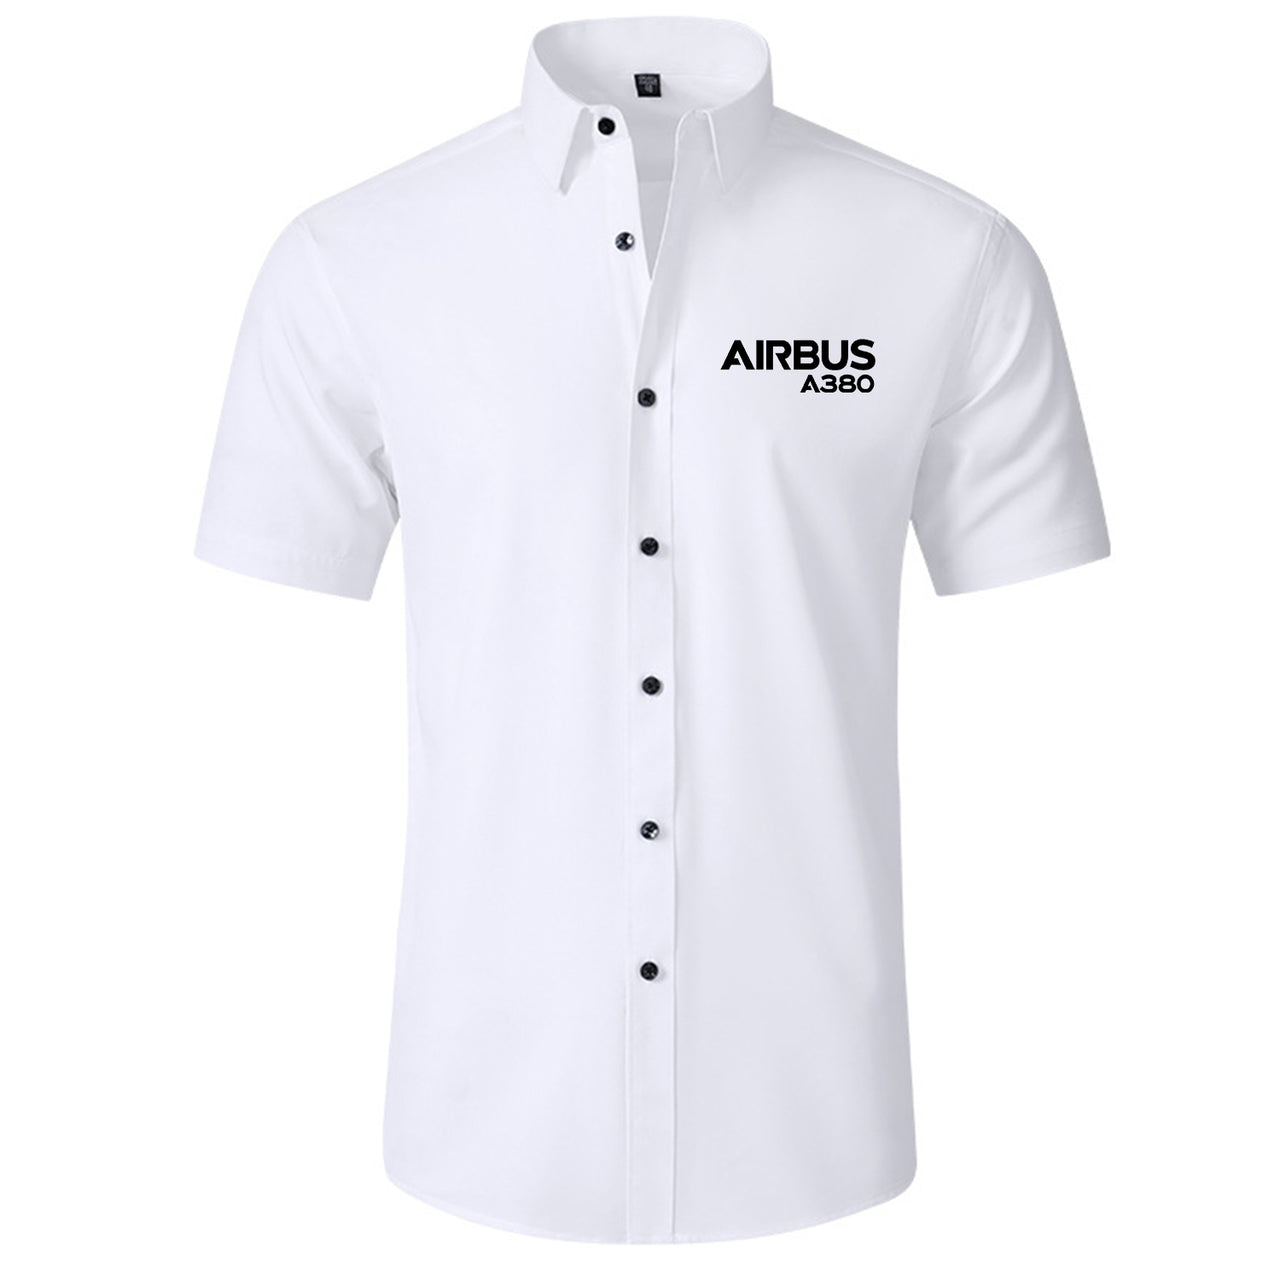 Airbus A380 & Text Designed Short Sleeve Shirts